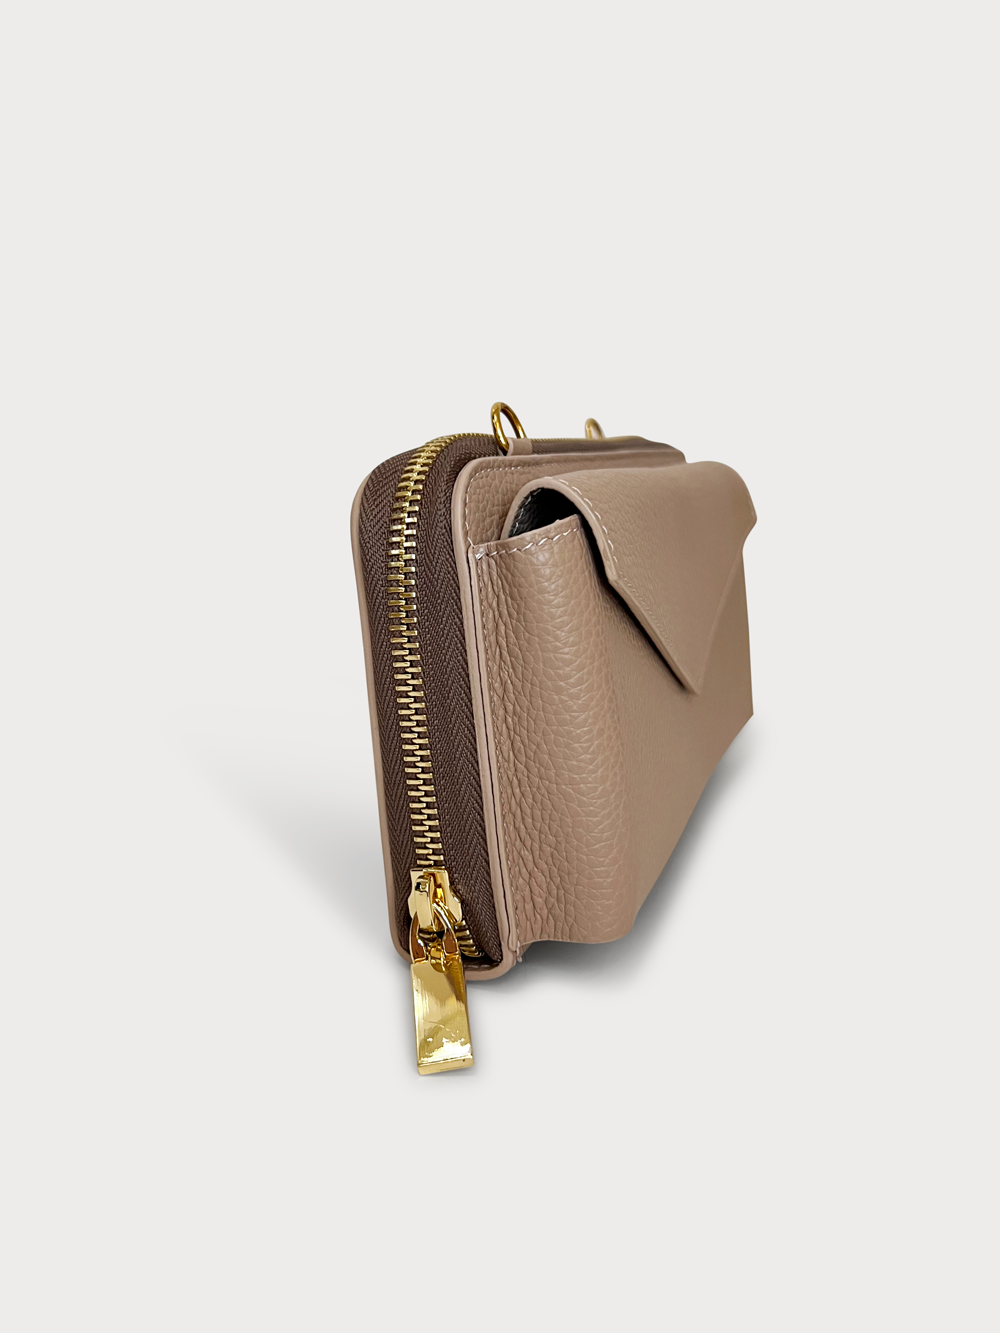 Mel Boteri | 'Himani' Wallet Clutch Bag With Detachable Cross-Body Strap | cipria leather | side view